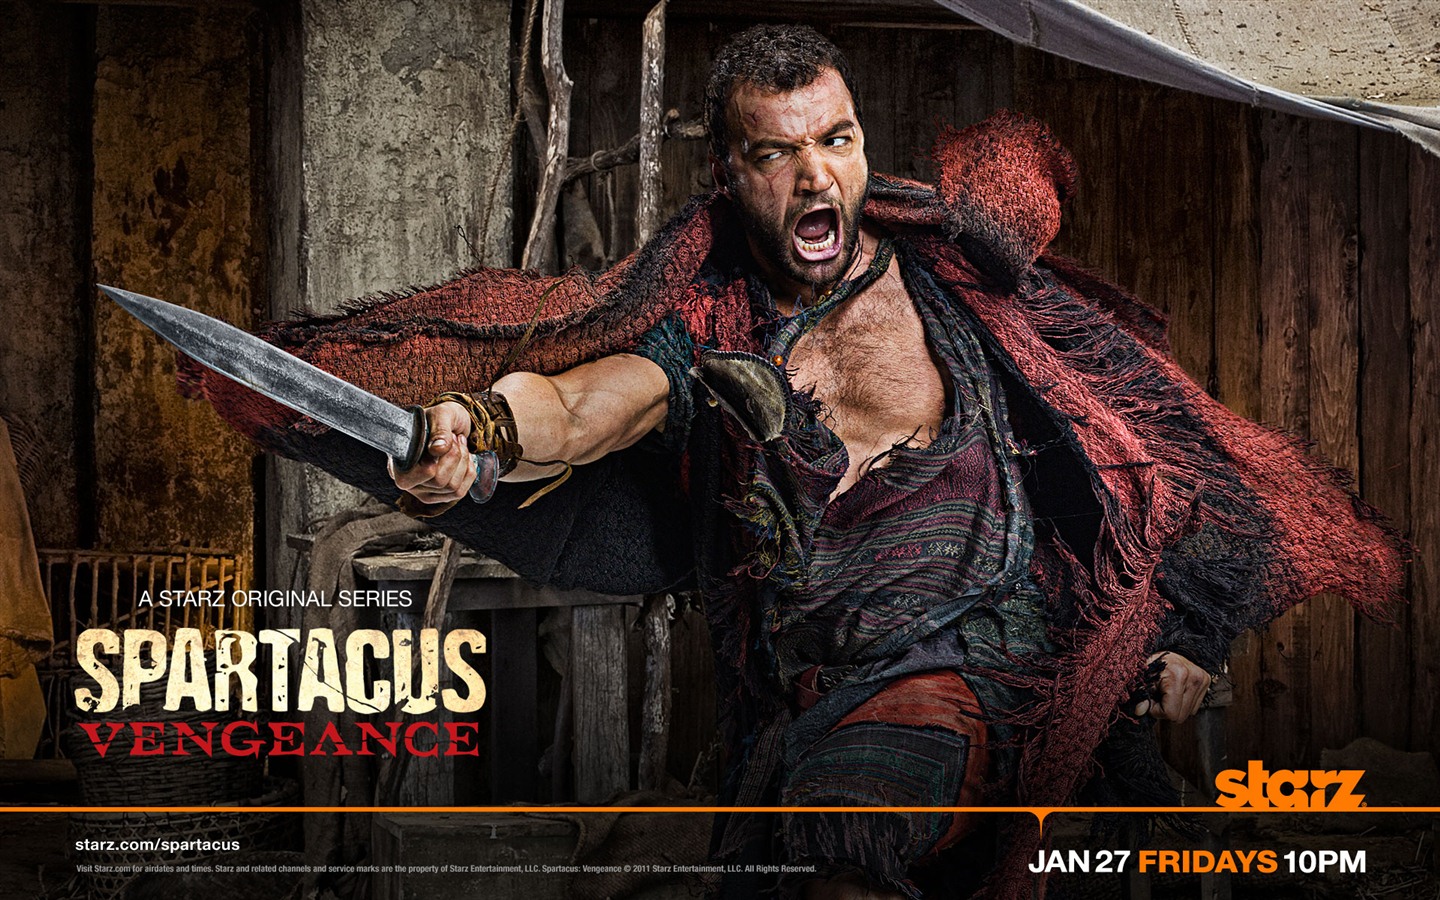 Spartacus: Vengeance HD wallpapers #12 - 1440x900